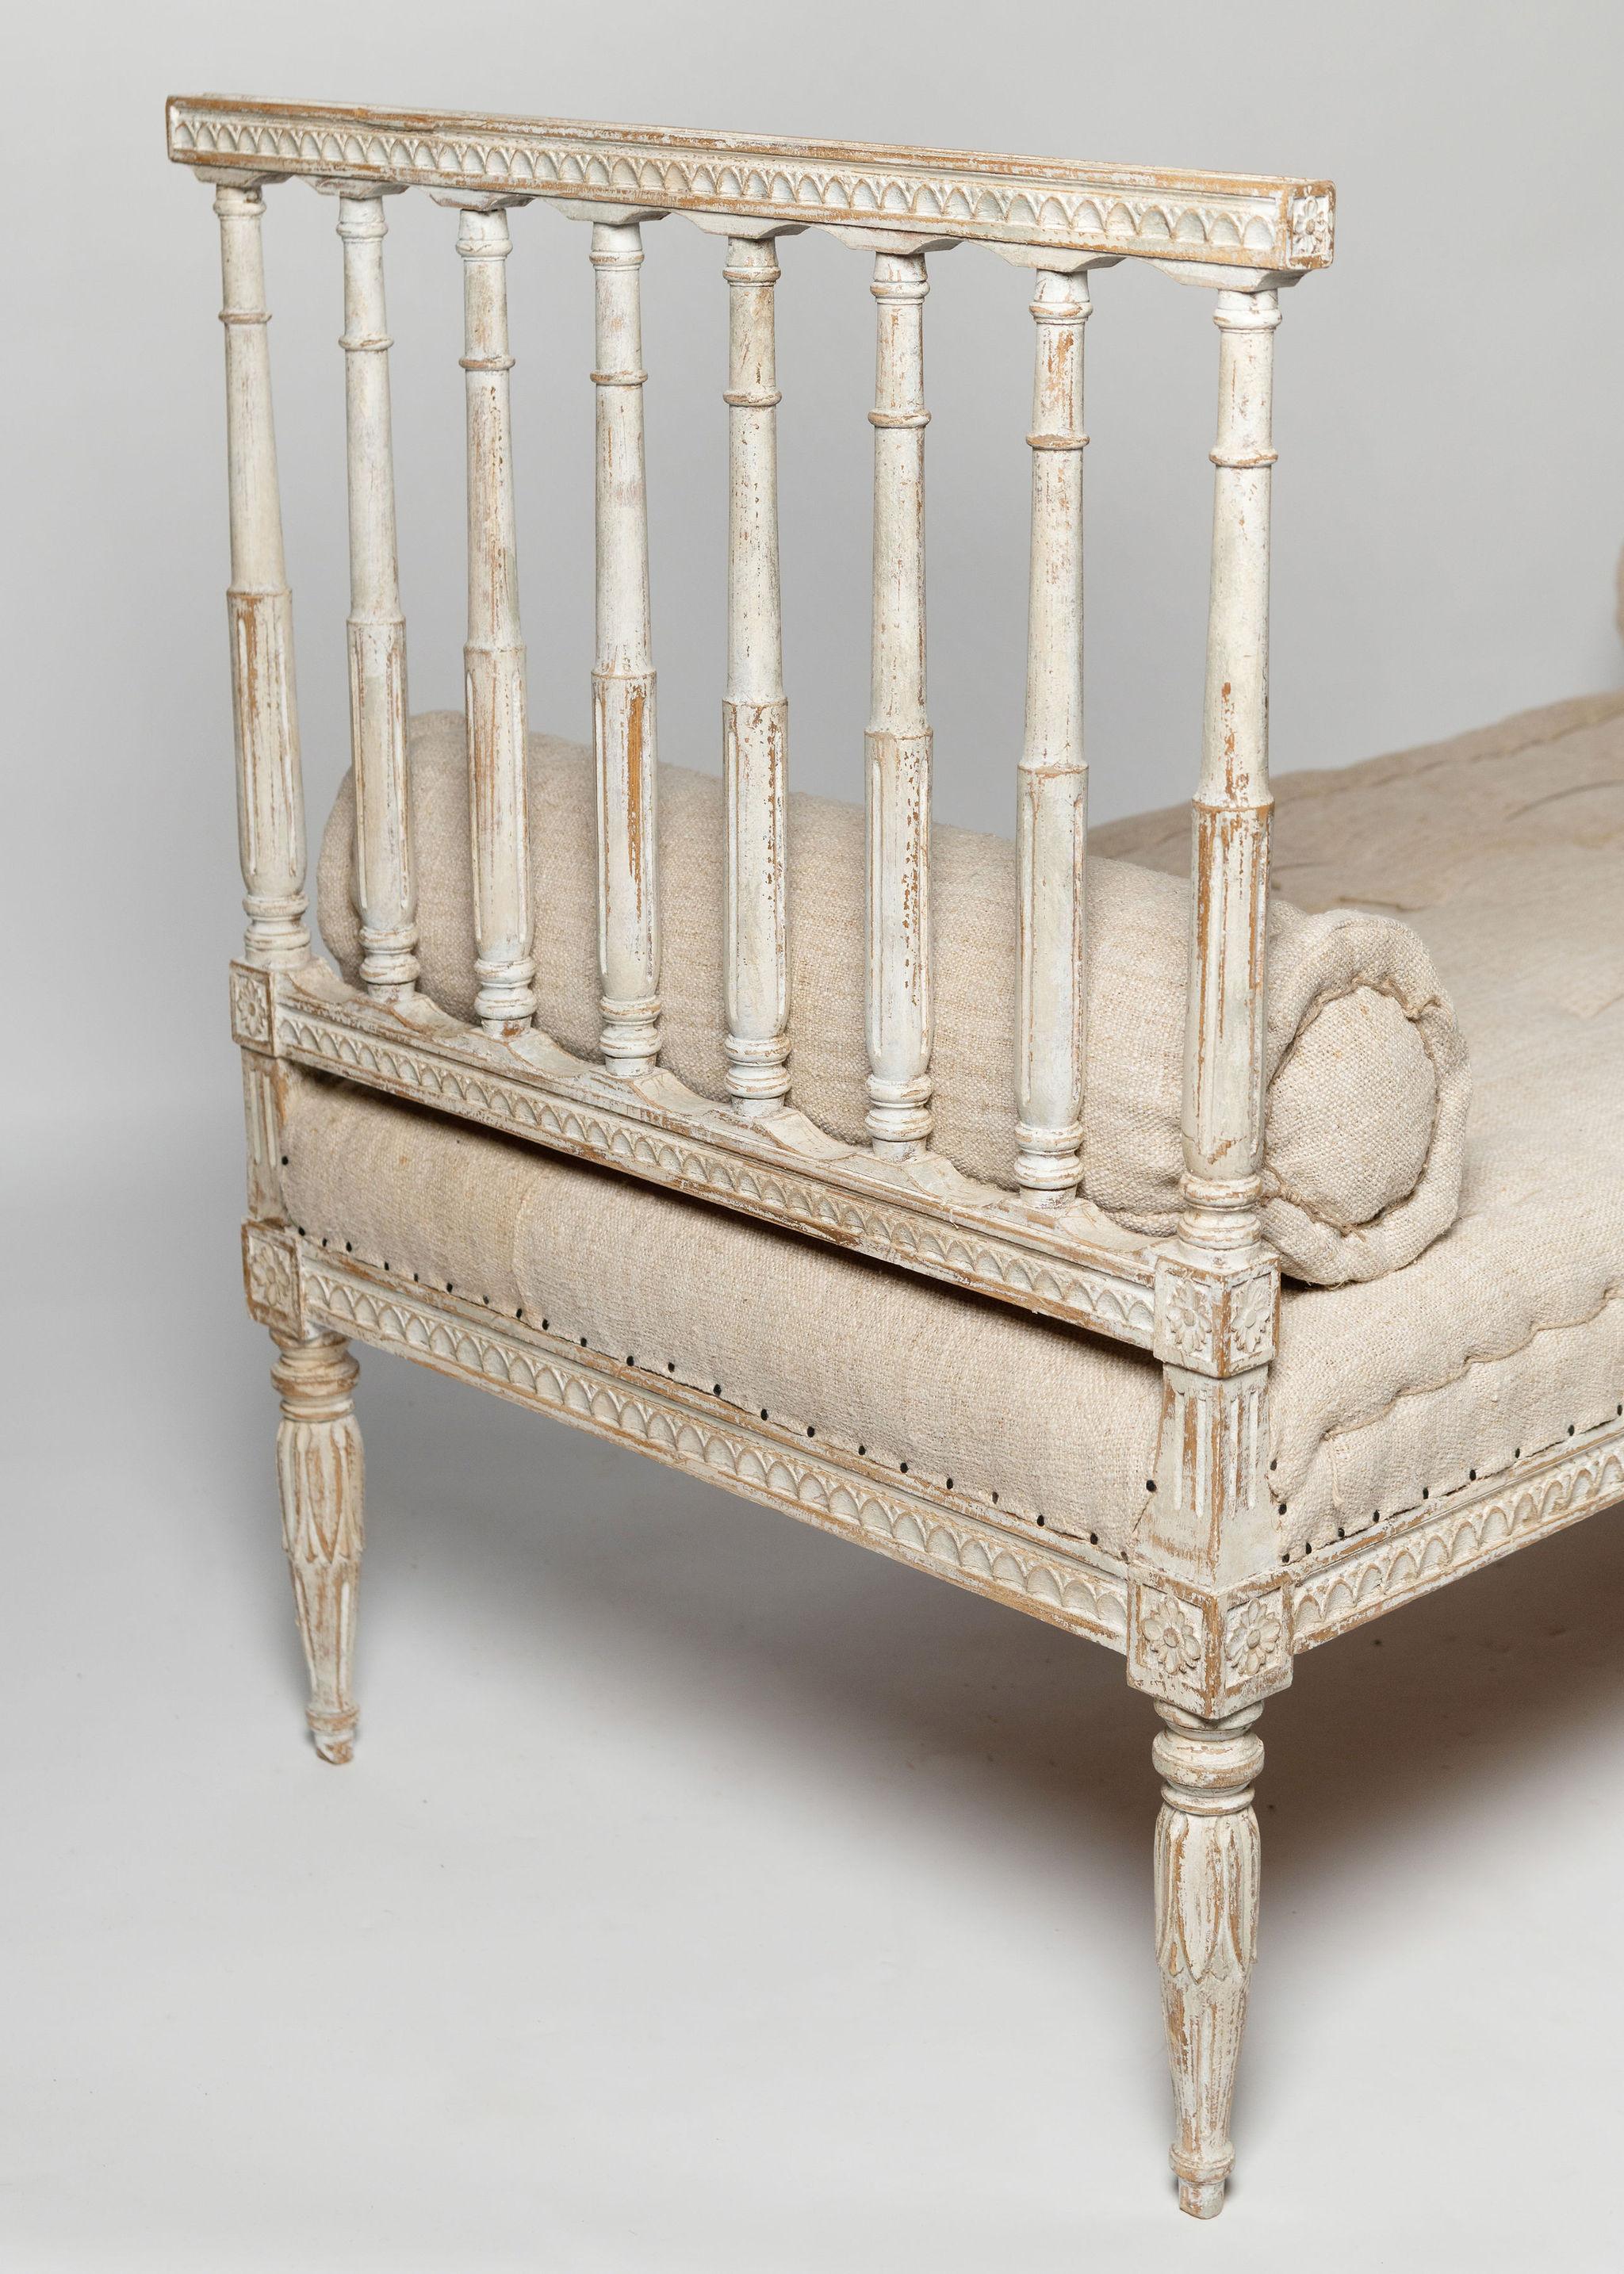 Antique Swedish daybed, sofa, stool, c1800, gustavian, Swedish upholstery   For Sale 4